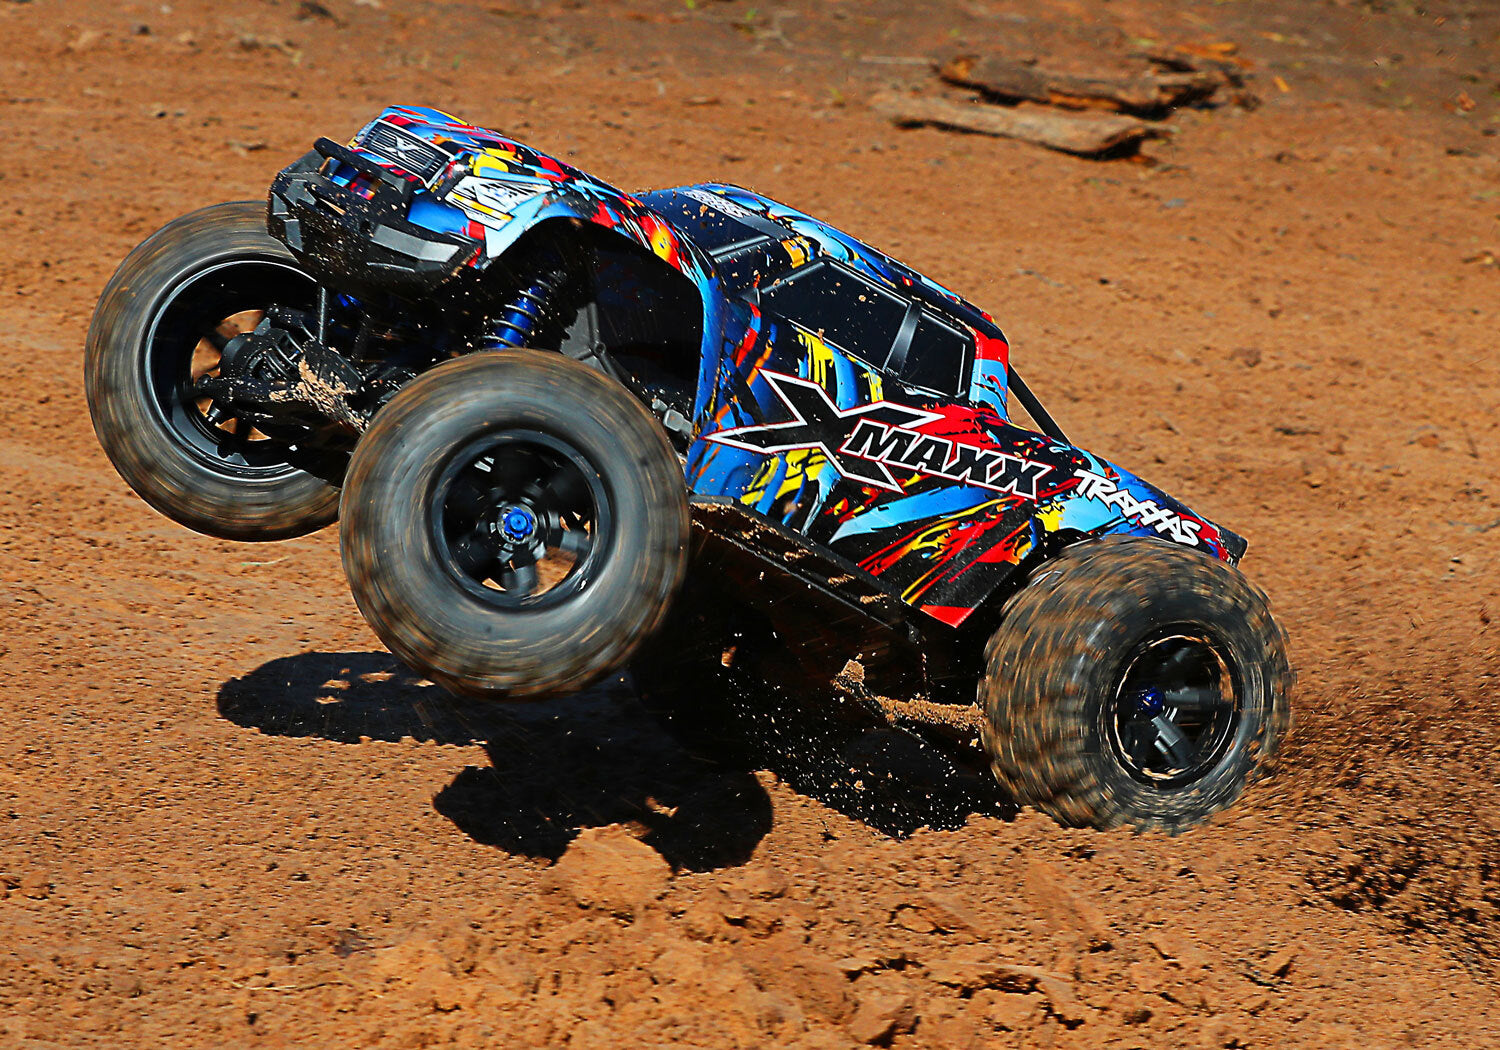 X-Maxx: Brushless Electric Monster Truck with TQi Traxxas Link Enabled 2.4GHz Radio System & Traxxas Stability Management (TSM)